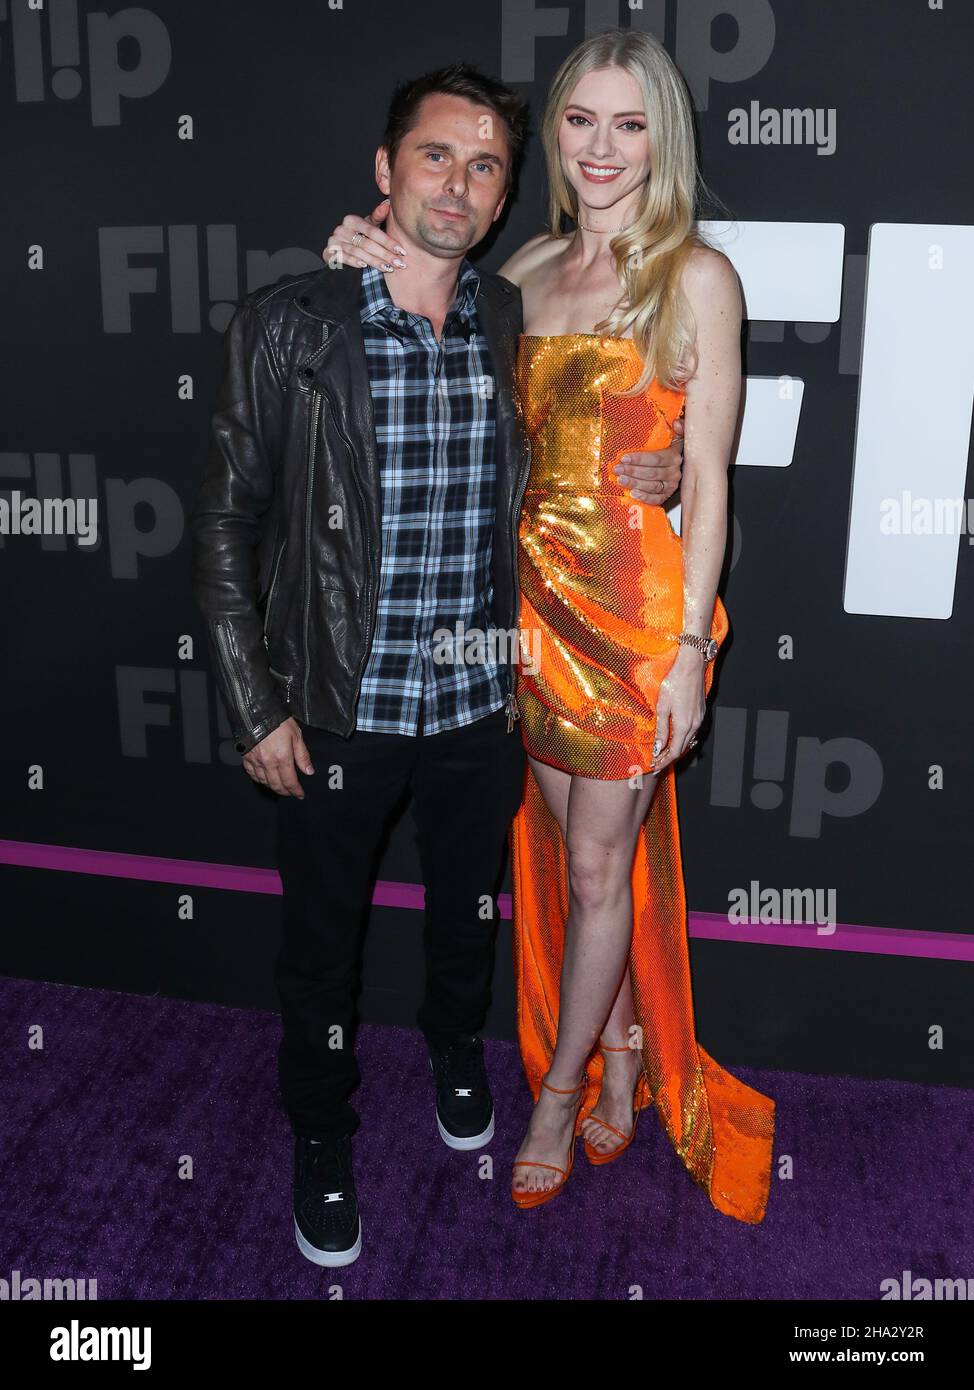 Hollywood, United States. 09th Dec, 2021. HOLLYWOOD, LOS ANGELES, CALIFORNIA, USA - DECEMBER 09: Singer Matt Bellamy and wife/model Elle Evans Bellamy arrive at the Flip Grand Launch Event Hosted by Grammy-Nominated Artist Halsey with Performances by Scout Willis, BIA, and Kehlani held at Avalon Hollywood on December 9, 2021 in Hollywood, Los Angeles, California, United States. (Photo by Xavier Collin/Image Press Agency) Credit: Image Press Agency/Alamy Live News Stock Photo